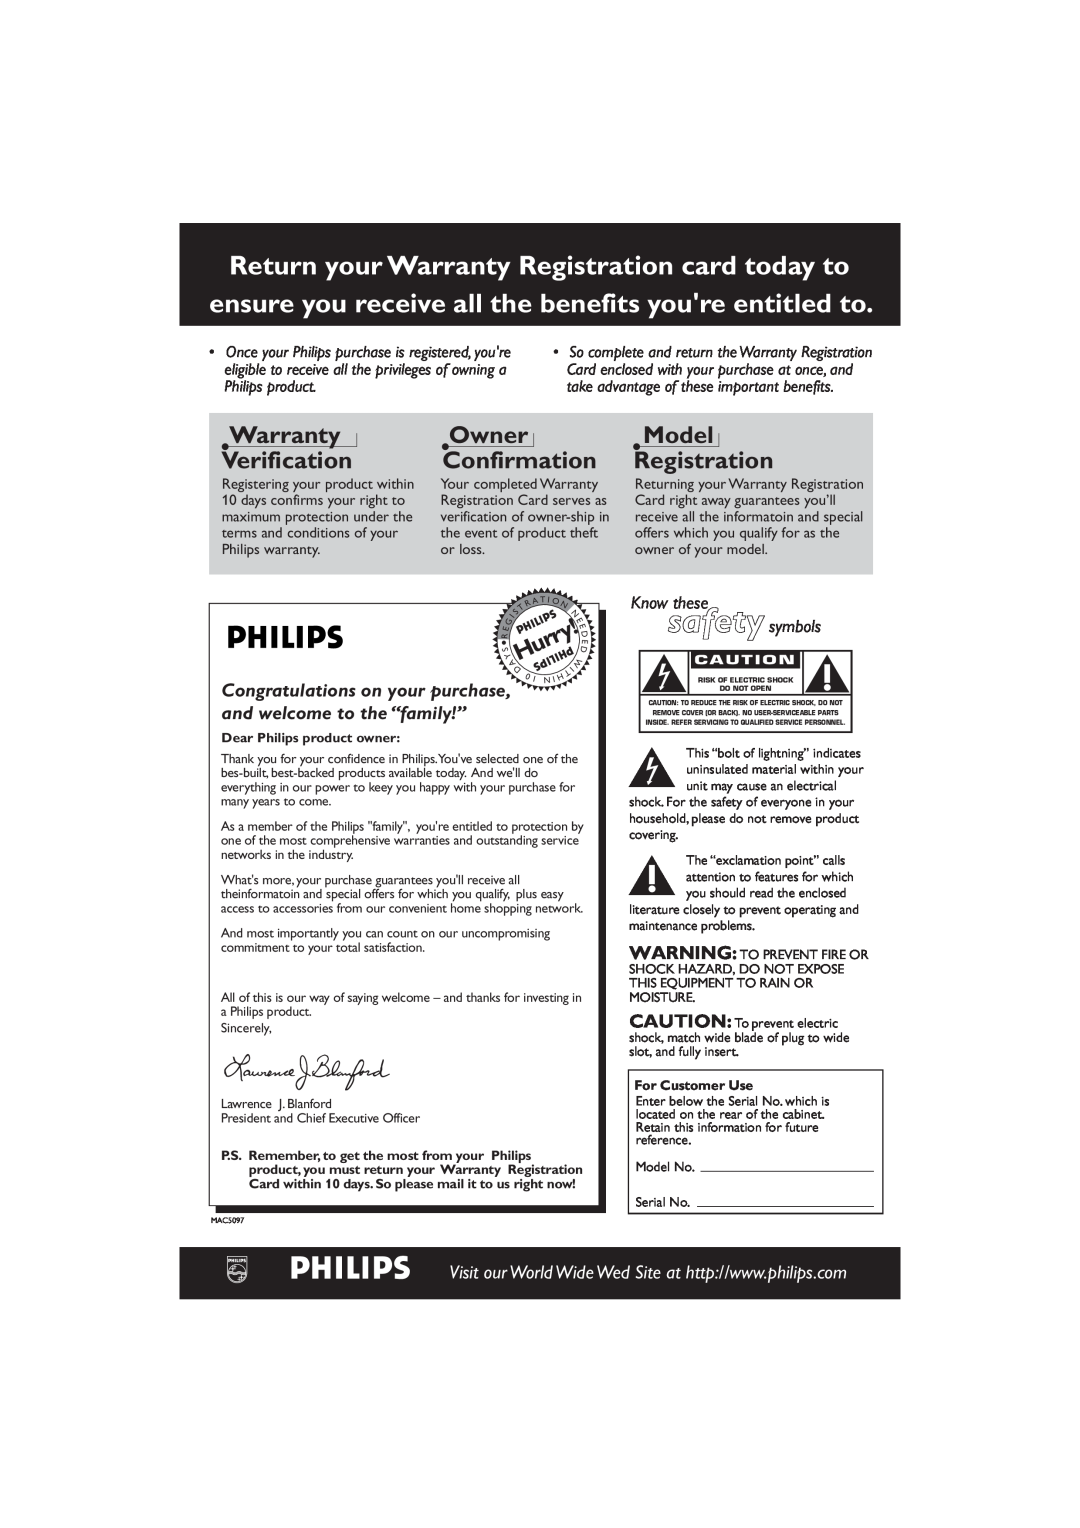 Philips FWC527/37 Hurry, Warranty Verification, Owner Confirmation, Model Registration, and welcome to the “family!” 